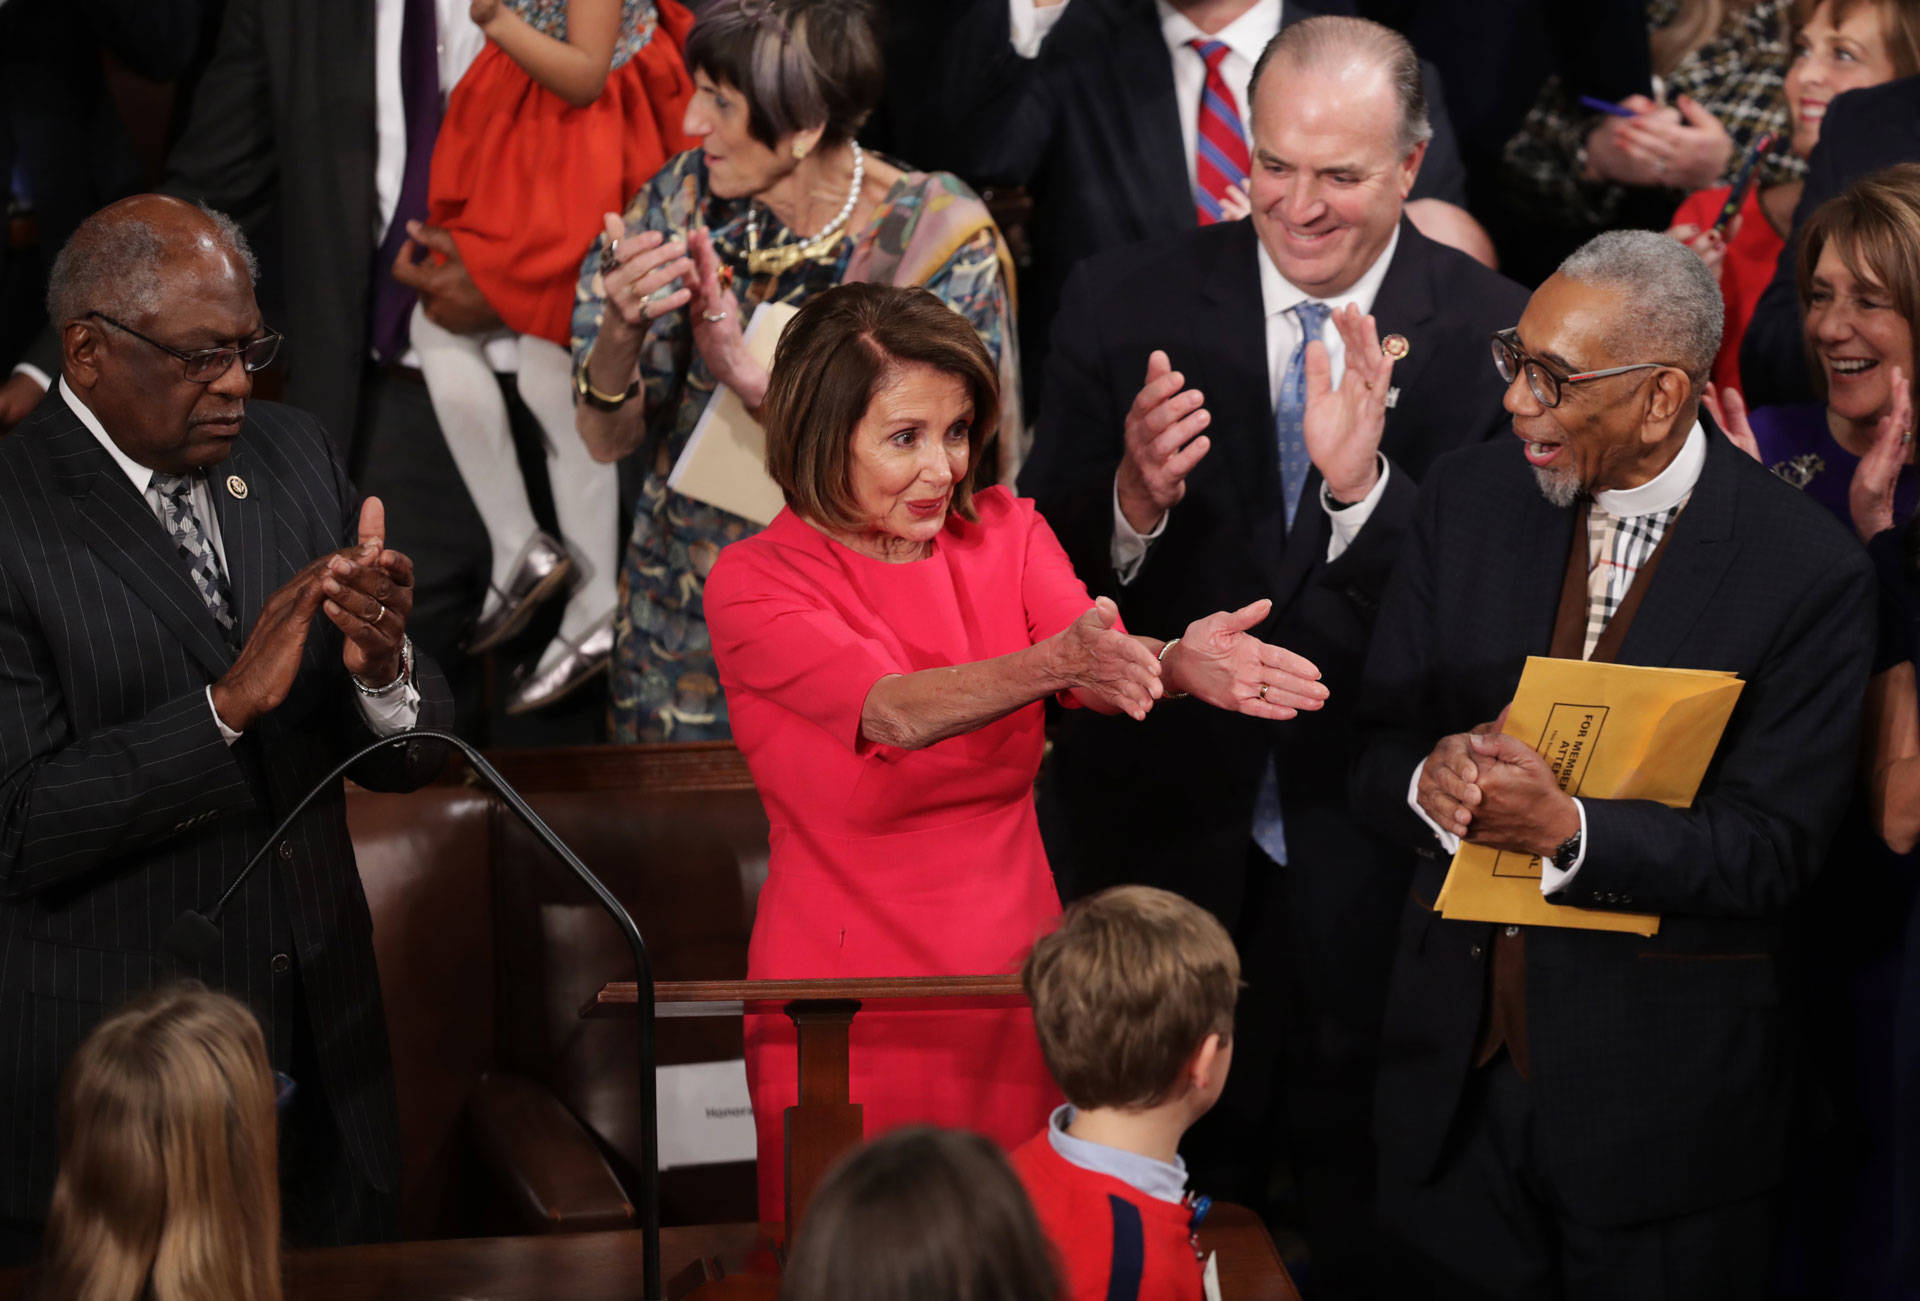 Members of Congress congratulate newly elected Speaker of the House Nancy Pelosi during the first session of the 116th Congress at the U.S. Capitol Jan. 3, 2019 in Washington, D.C. Chip Somodevilla/Getty Images